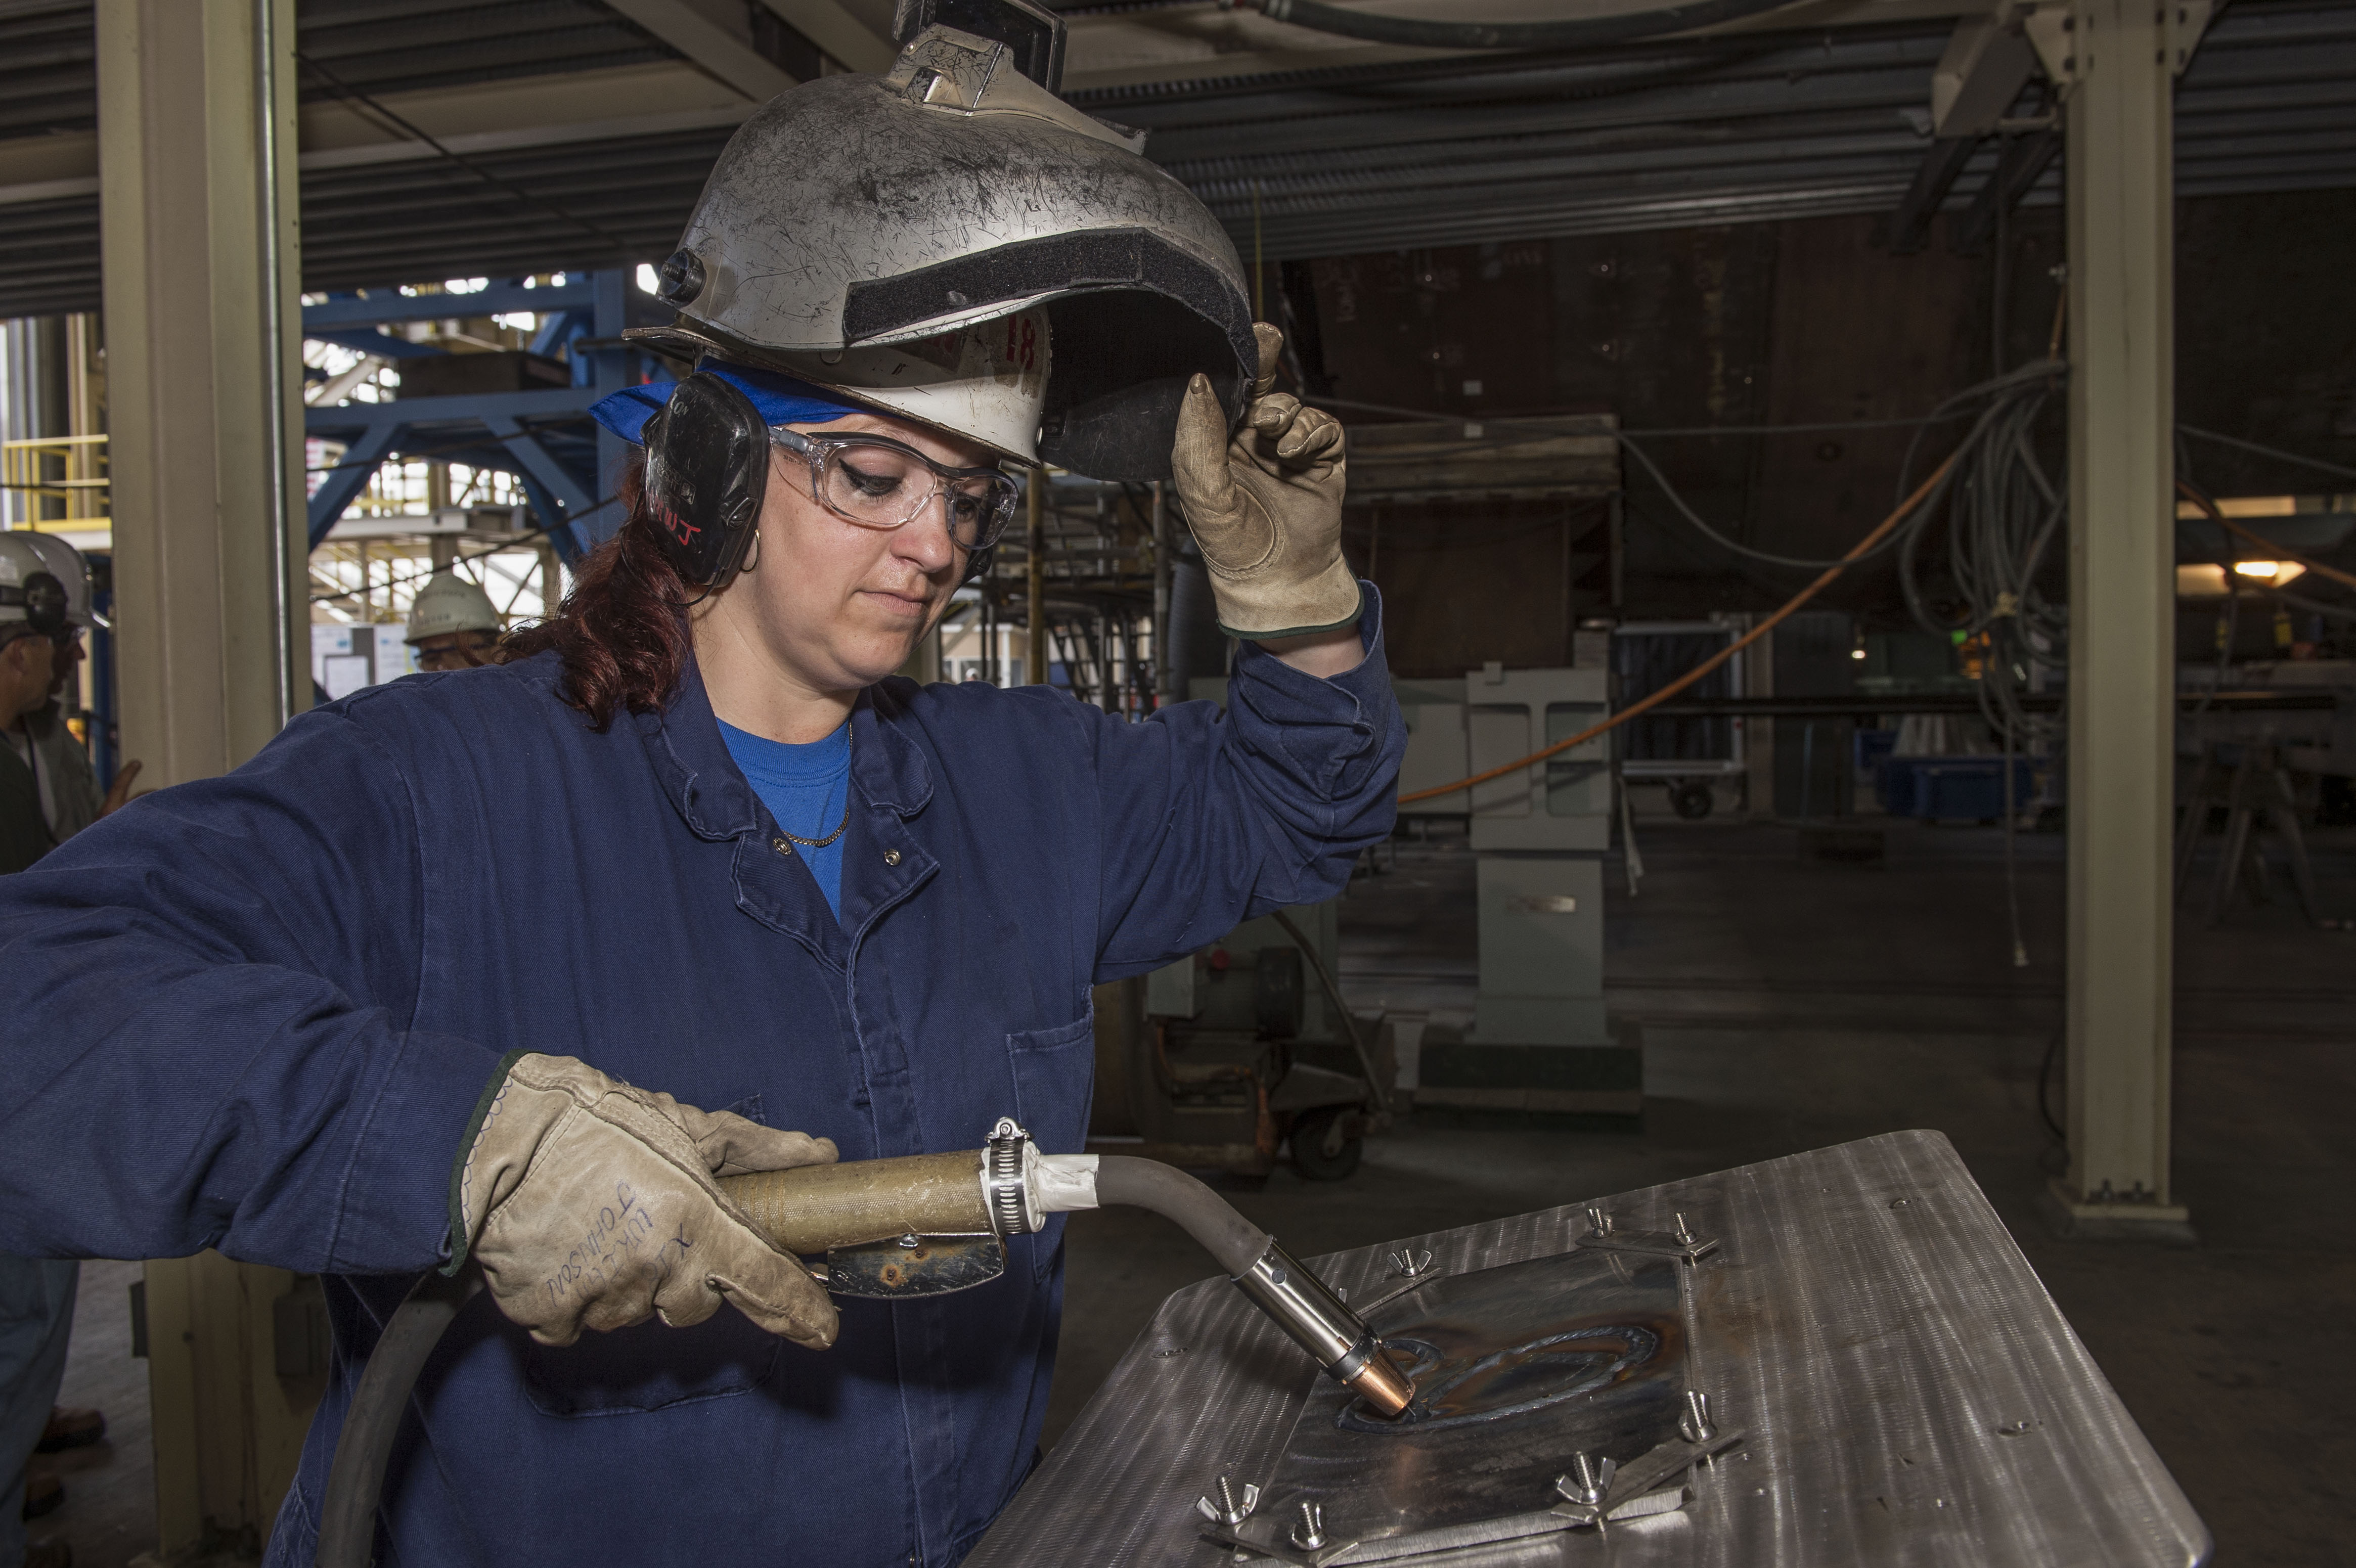 Heather Johnson welder for Indiana Keel Laying. Heather is the first female welder to weld the initals of a ships's sponsor on a Virginia-class submarine.